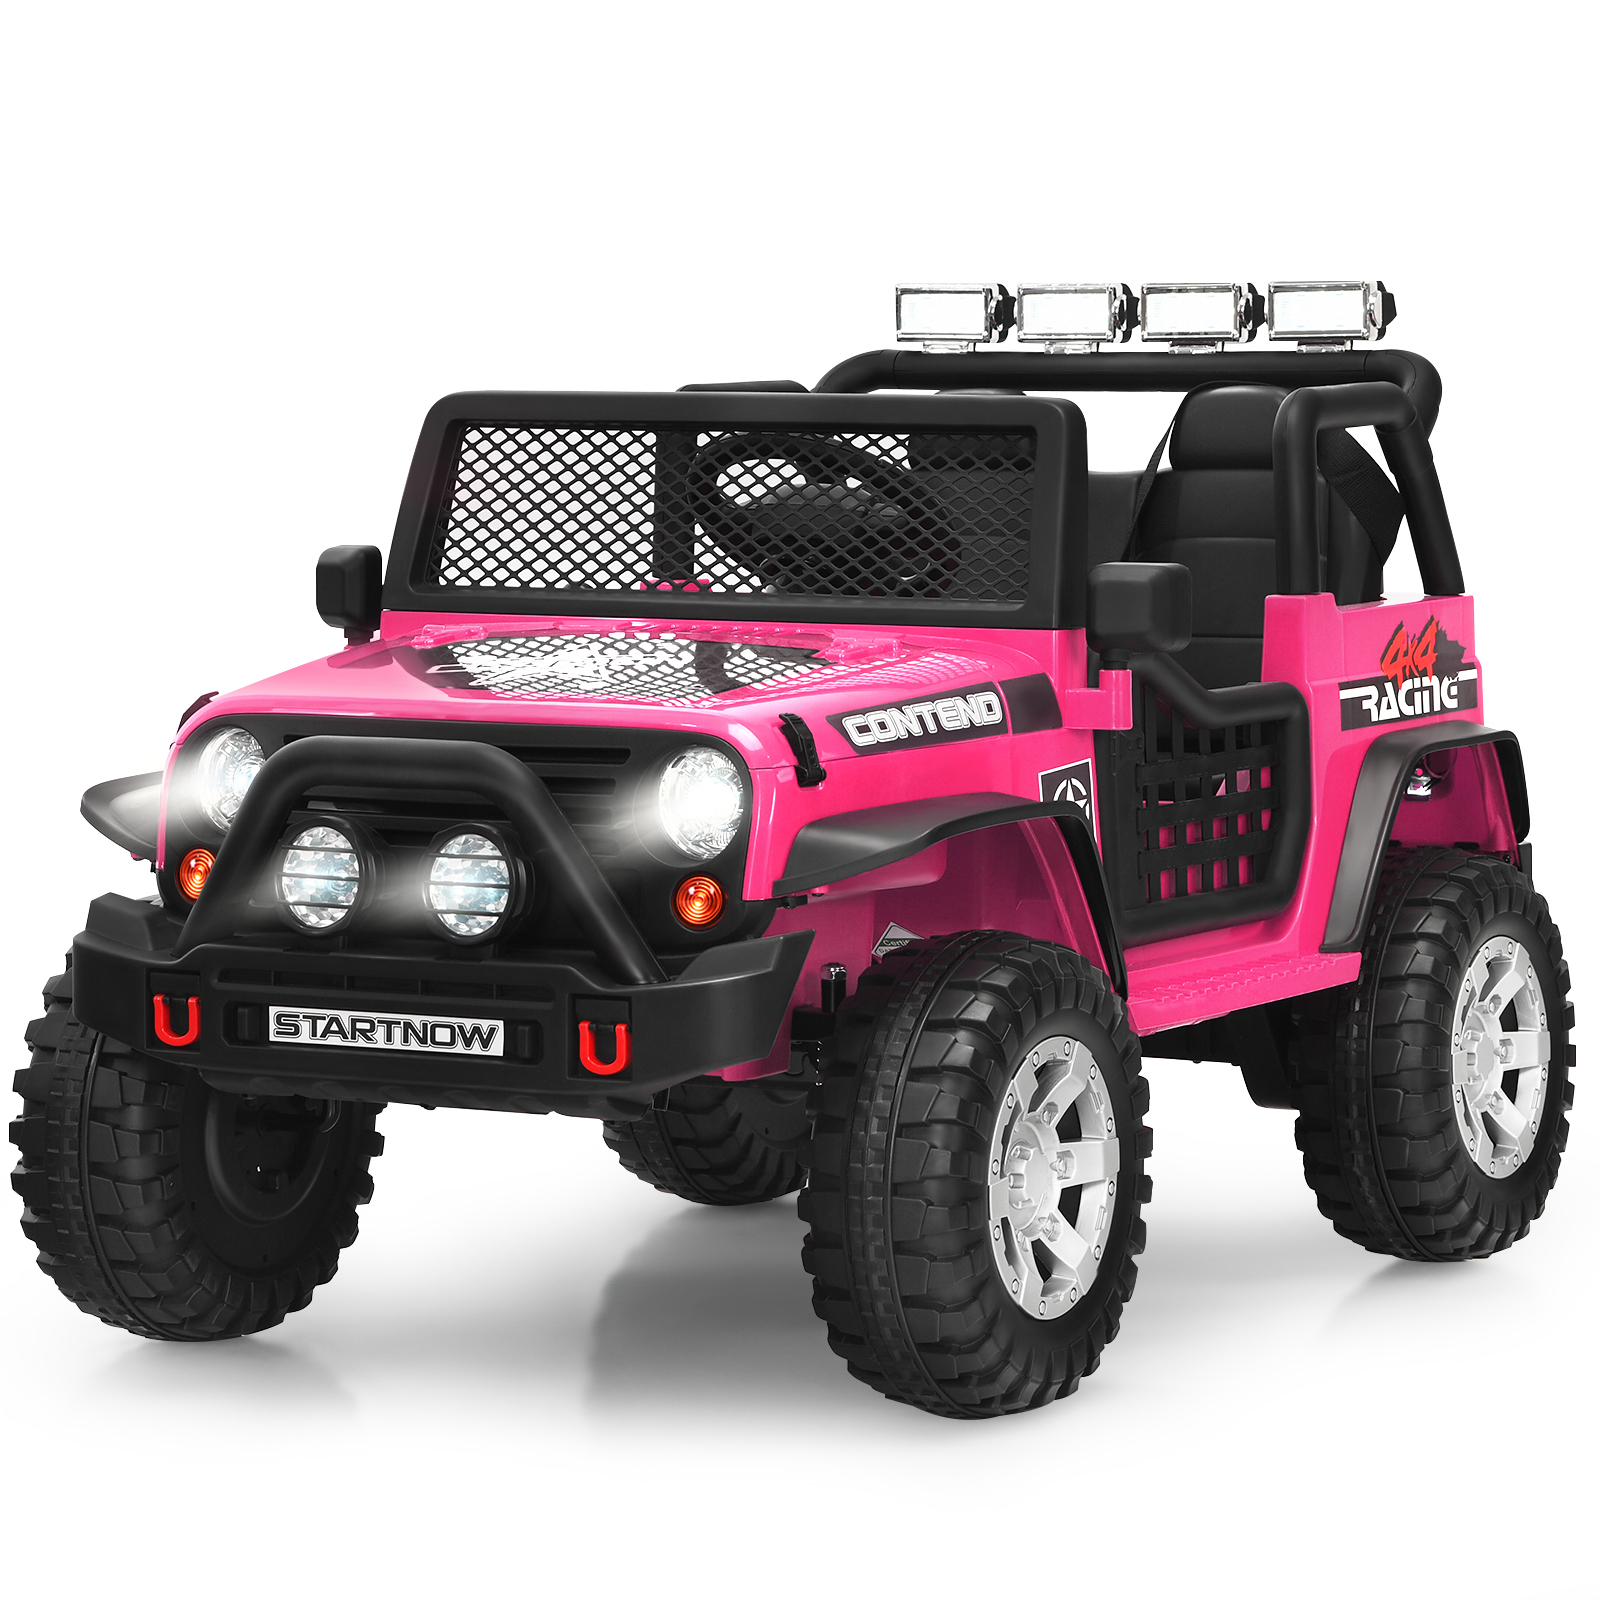 2-Seat Kids Ride on Truck with Parent Remote Control-Pink